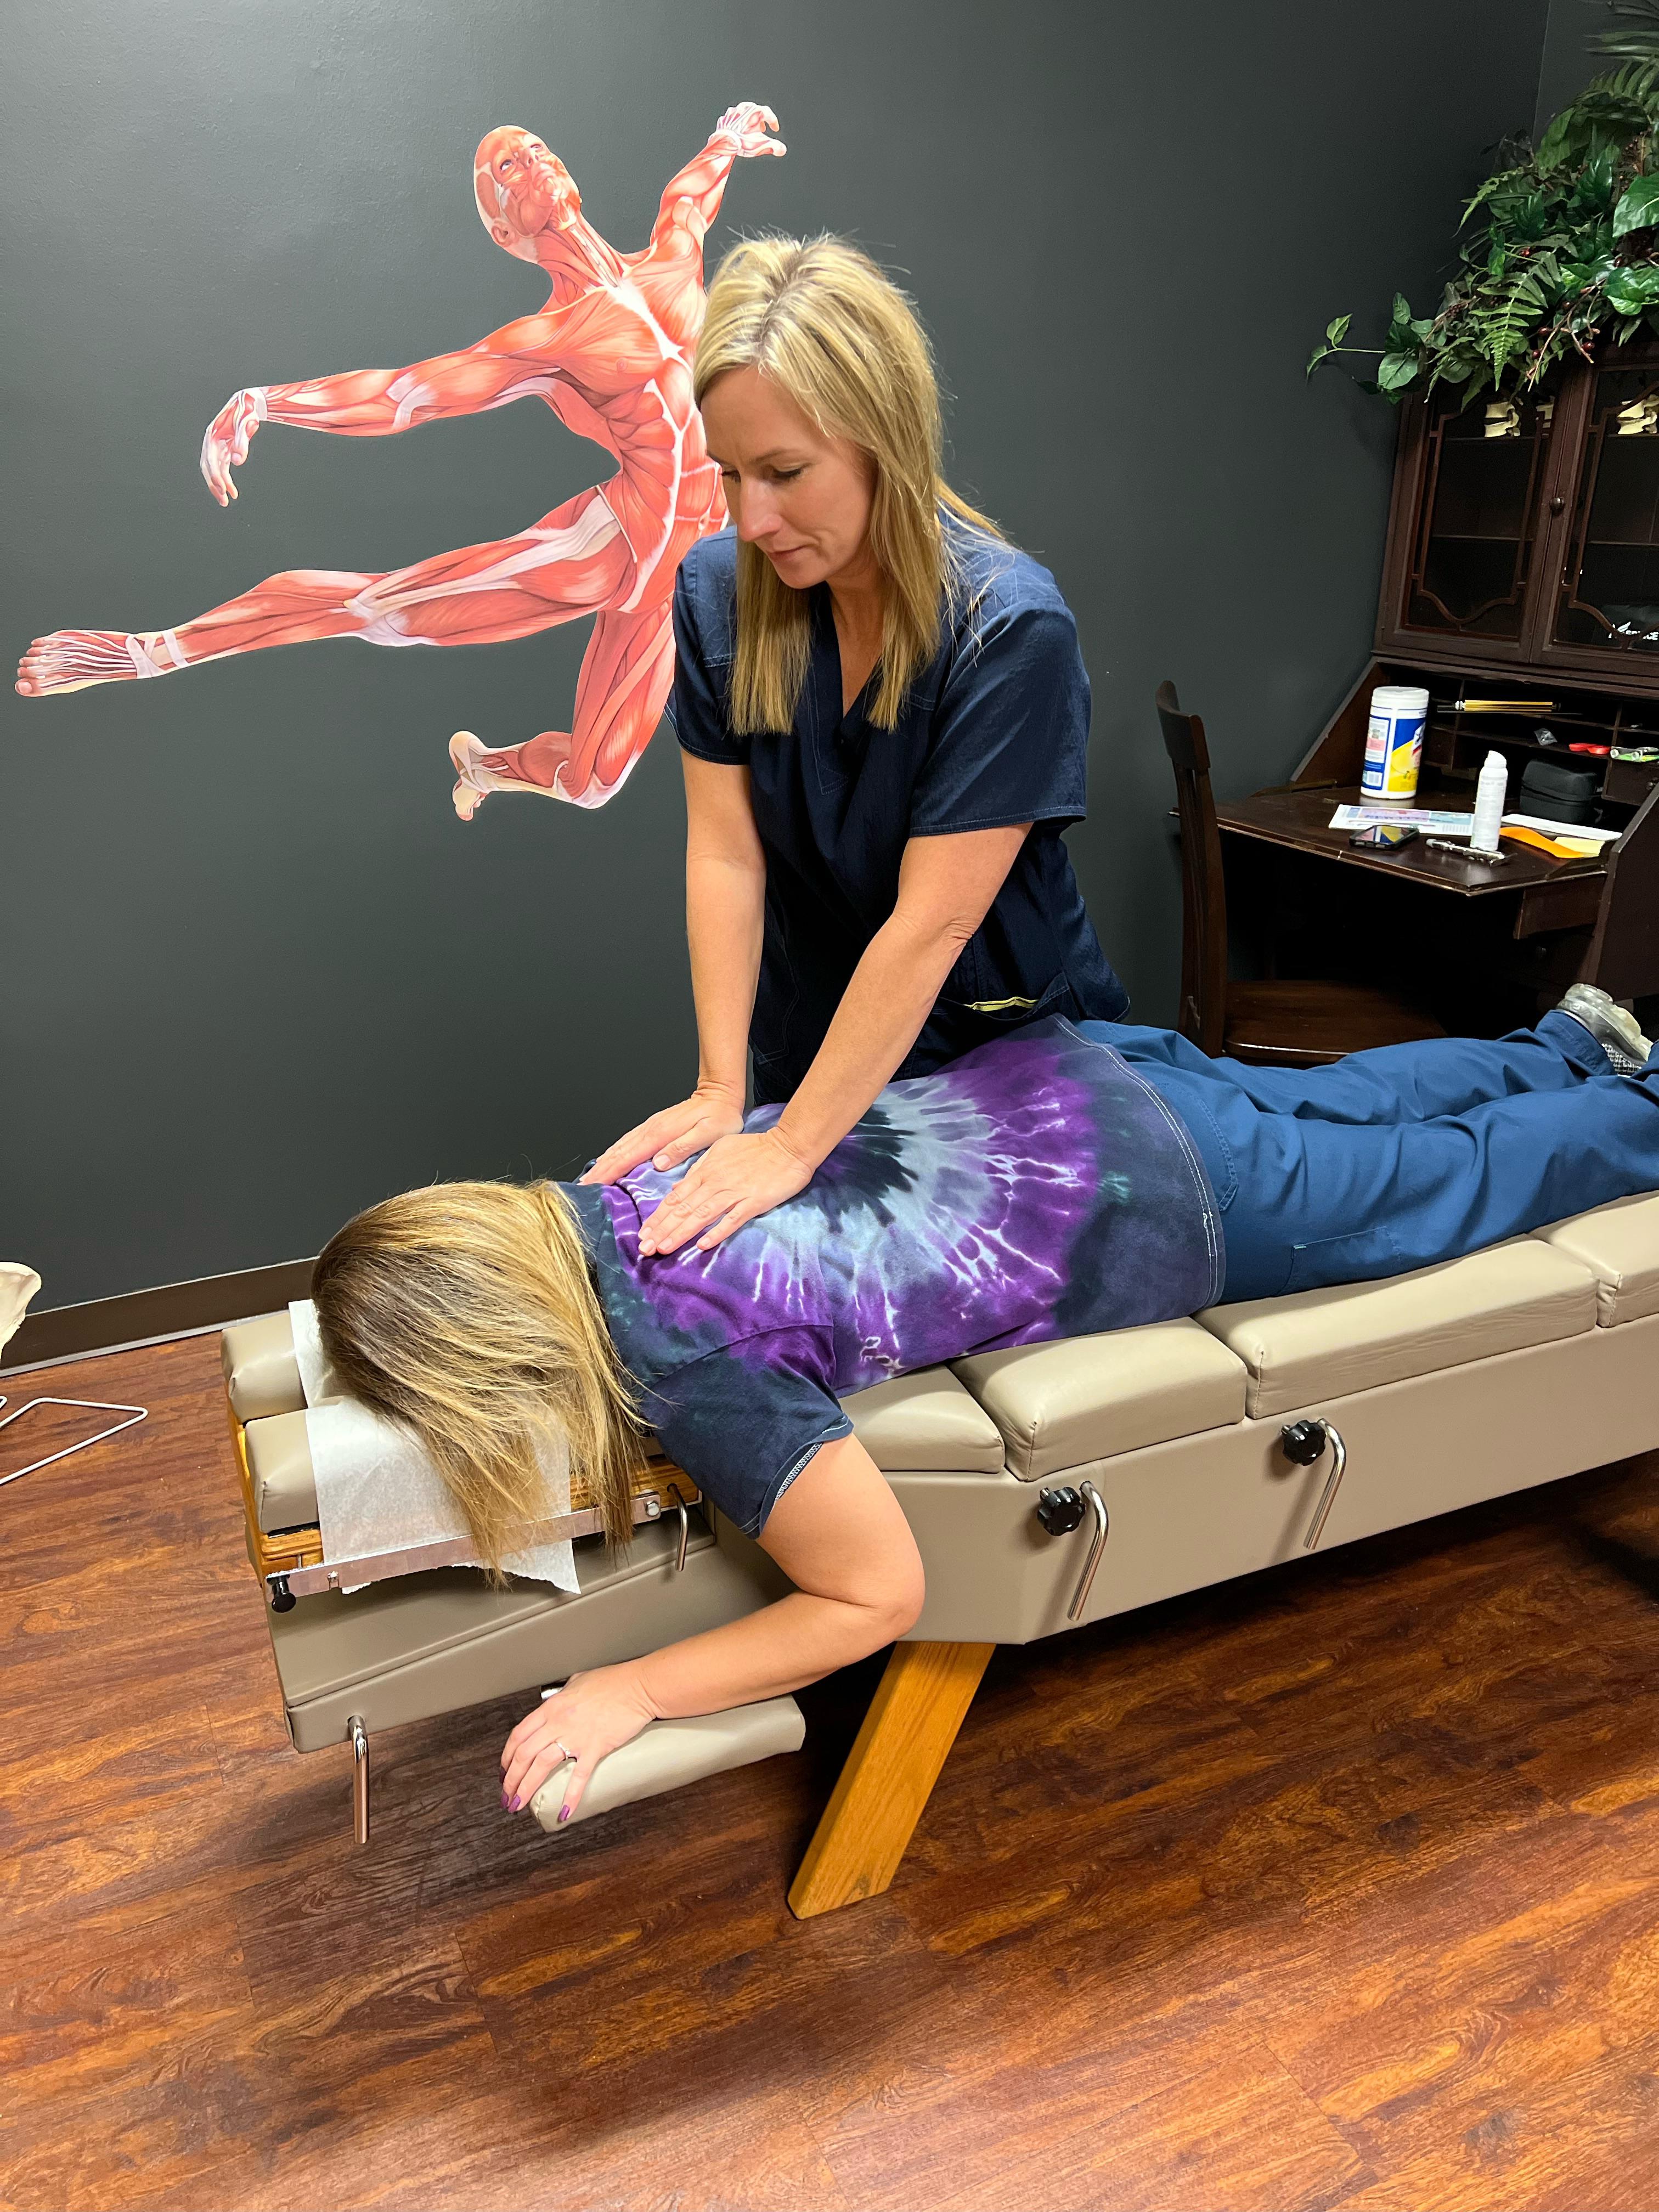 Dr. Tara Daniel, D.C. and Chiropractic Associates of Murfreesboro provide professional chiropractic services to the Murfreesboro area and surrounding communities. Service offerings focus on providing relief from acute and chronic pain, increased mobility and function, as well as long-term wellness care to individuals and families of all ages.